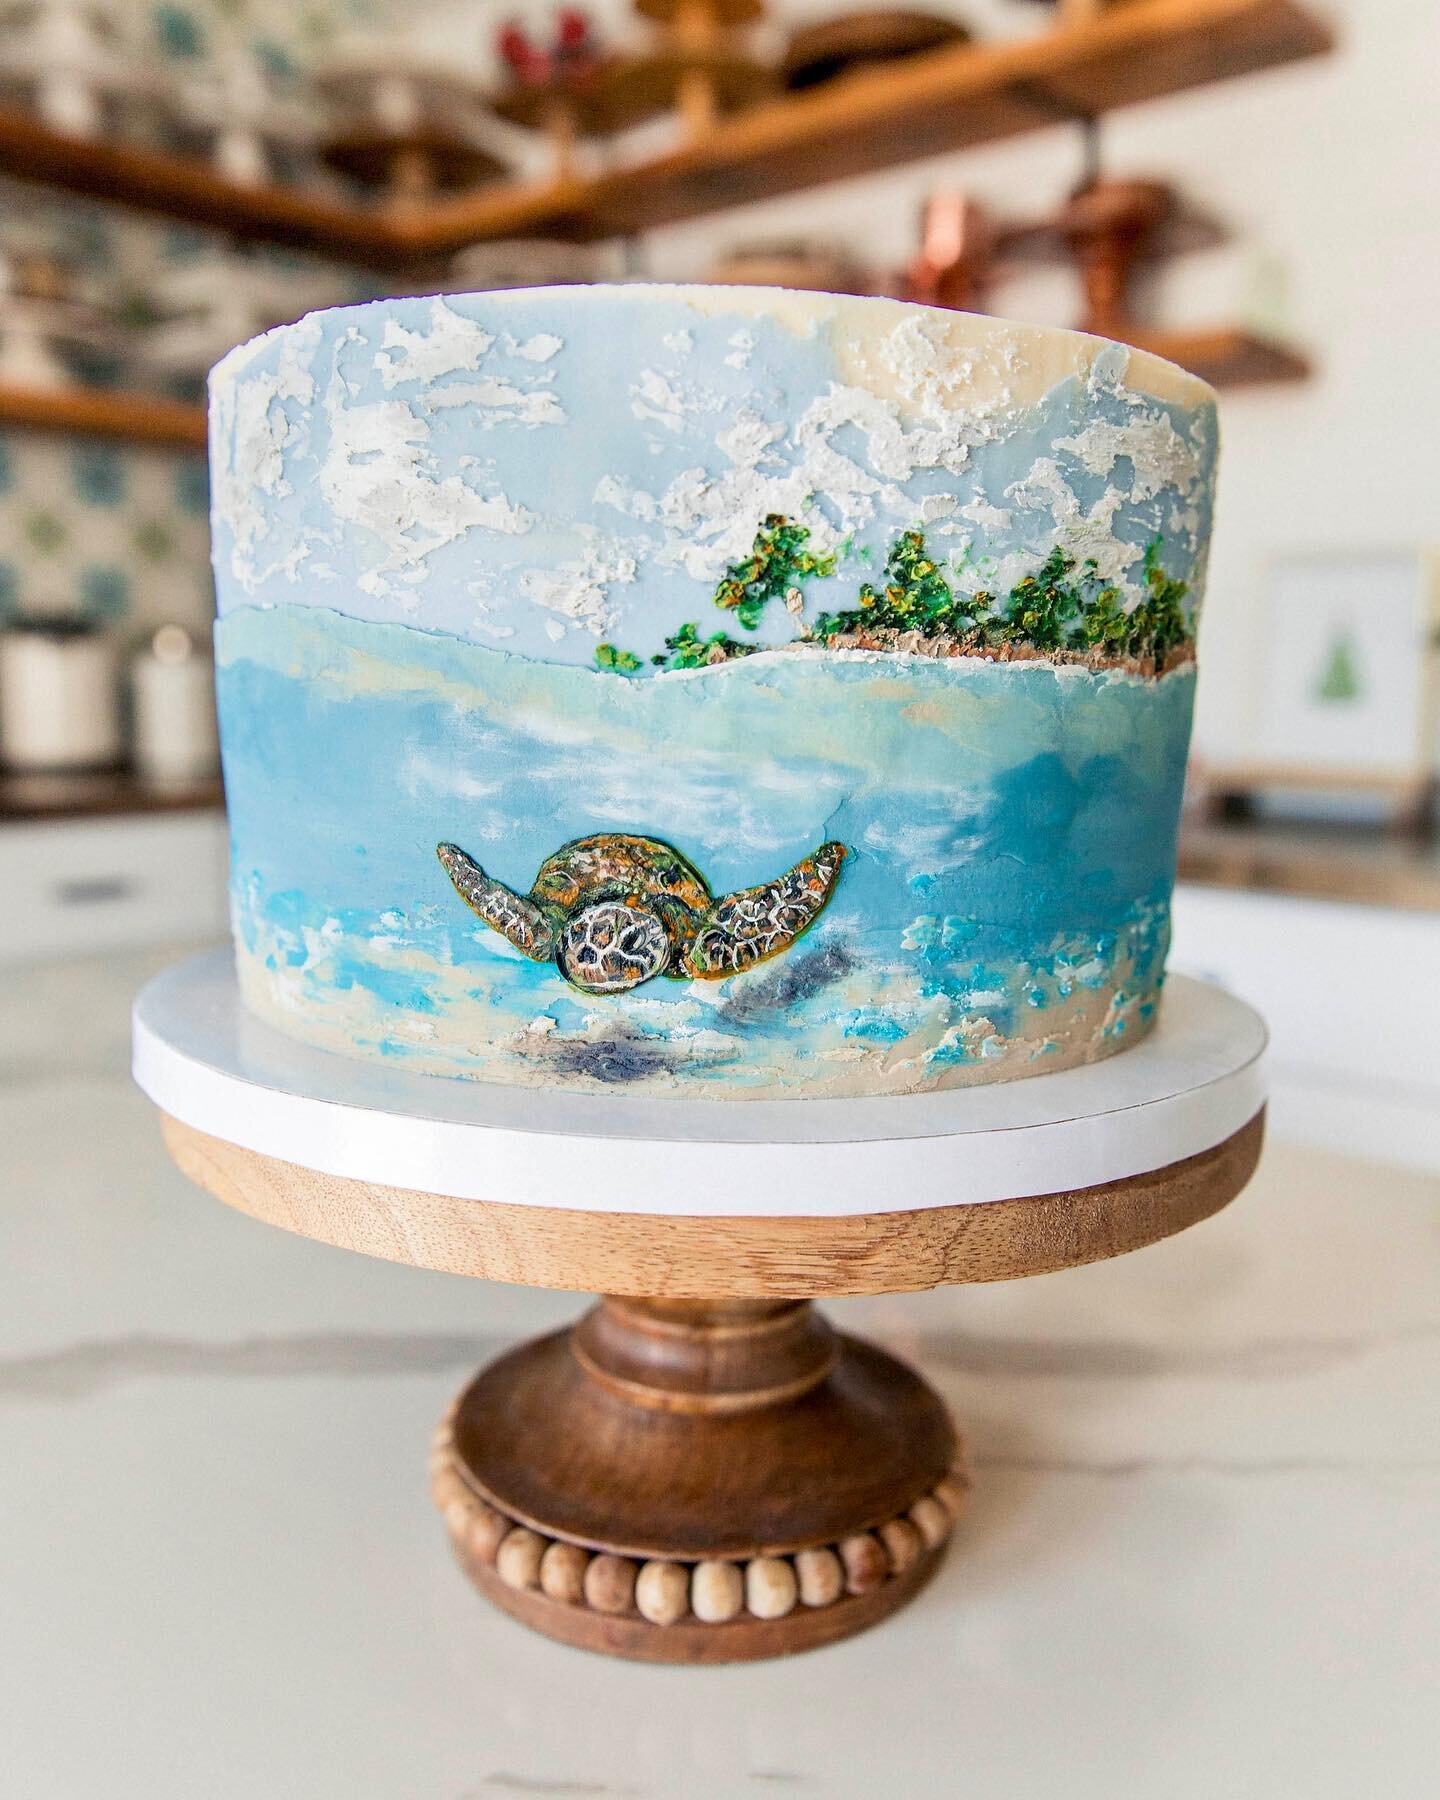 Sandy beaches and clear waters- a slice of heaven (and cake) 🌴

Made for my friend, Becca, for her birthday.

All buttercream, painted with a palette knives and artist brushes. I used @colour.mill oil-based tints. They&rsquo;re my absolute favorite!